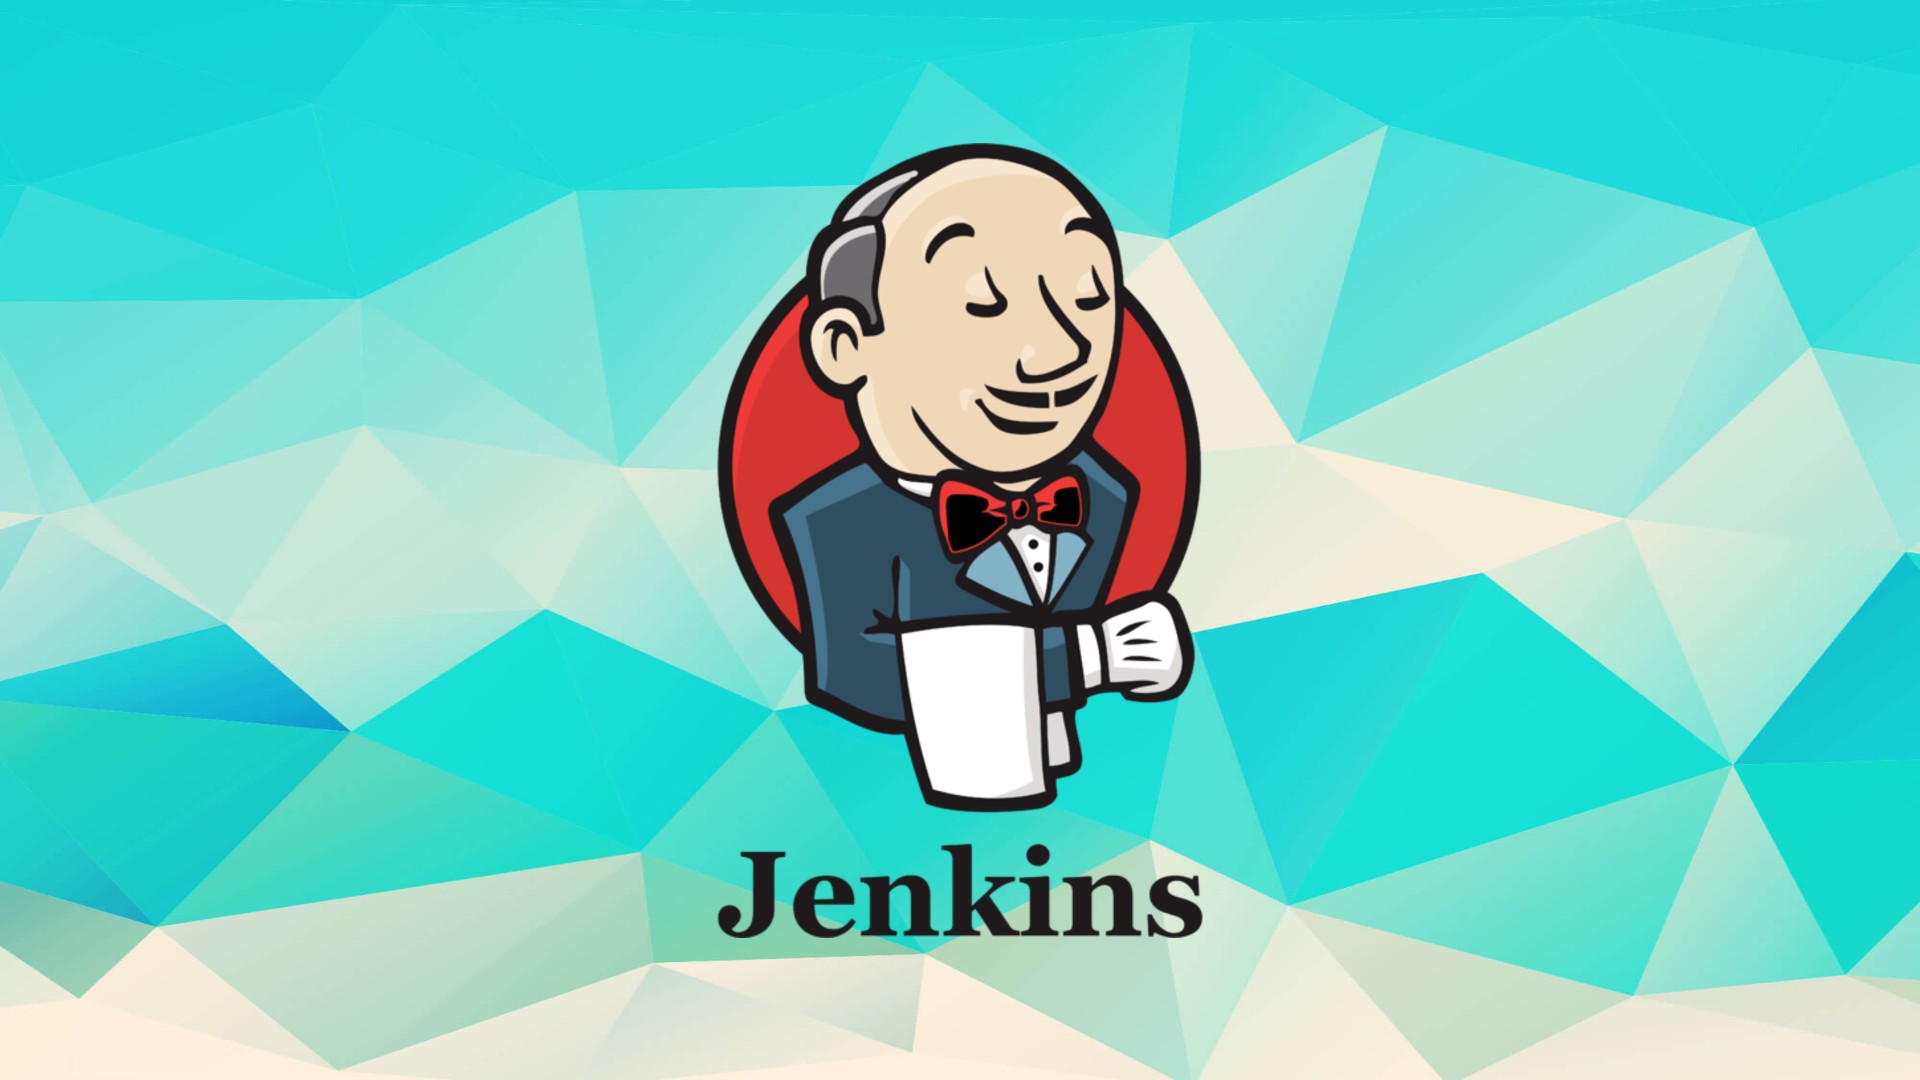 Overview of Jenkins